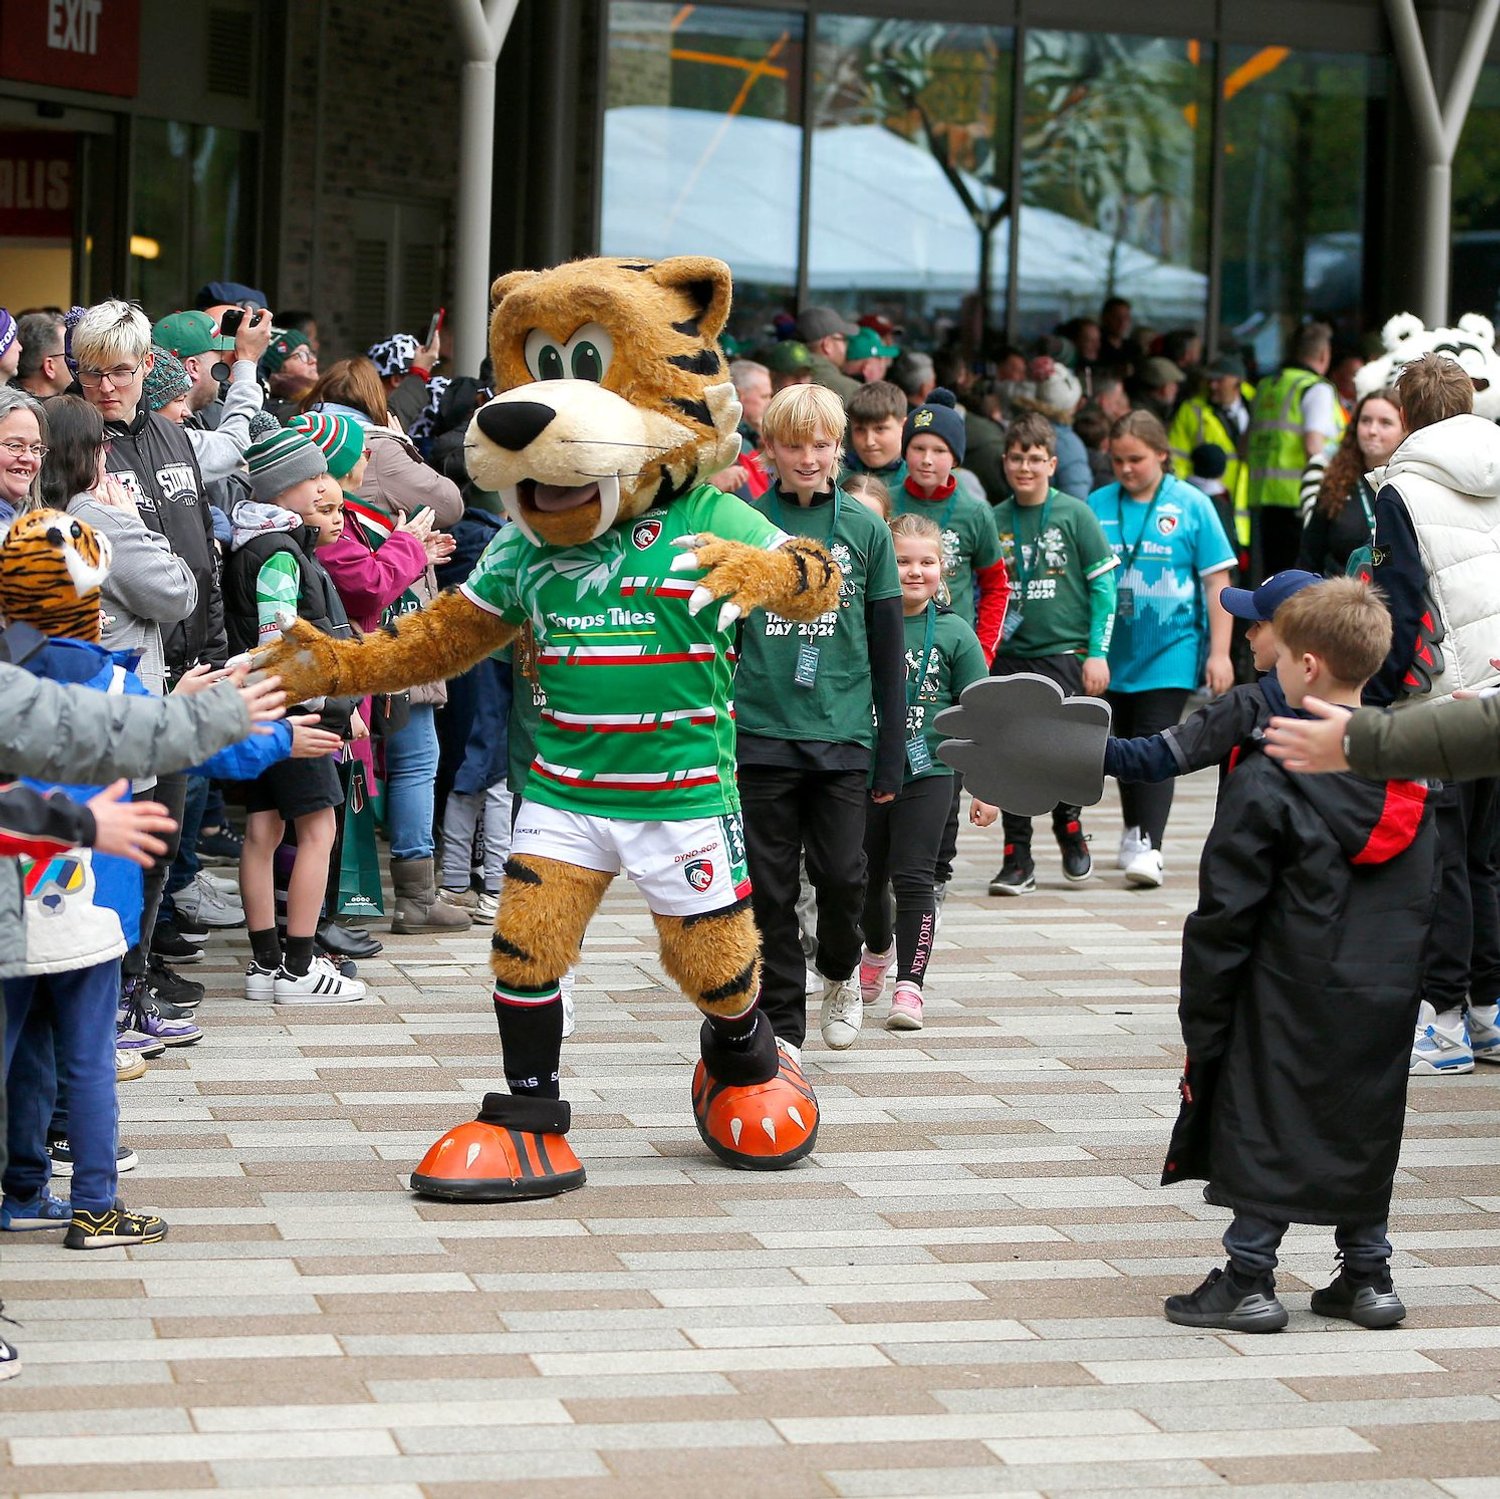 Members of the Junior Tigers Club in action around the ground